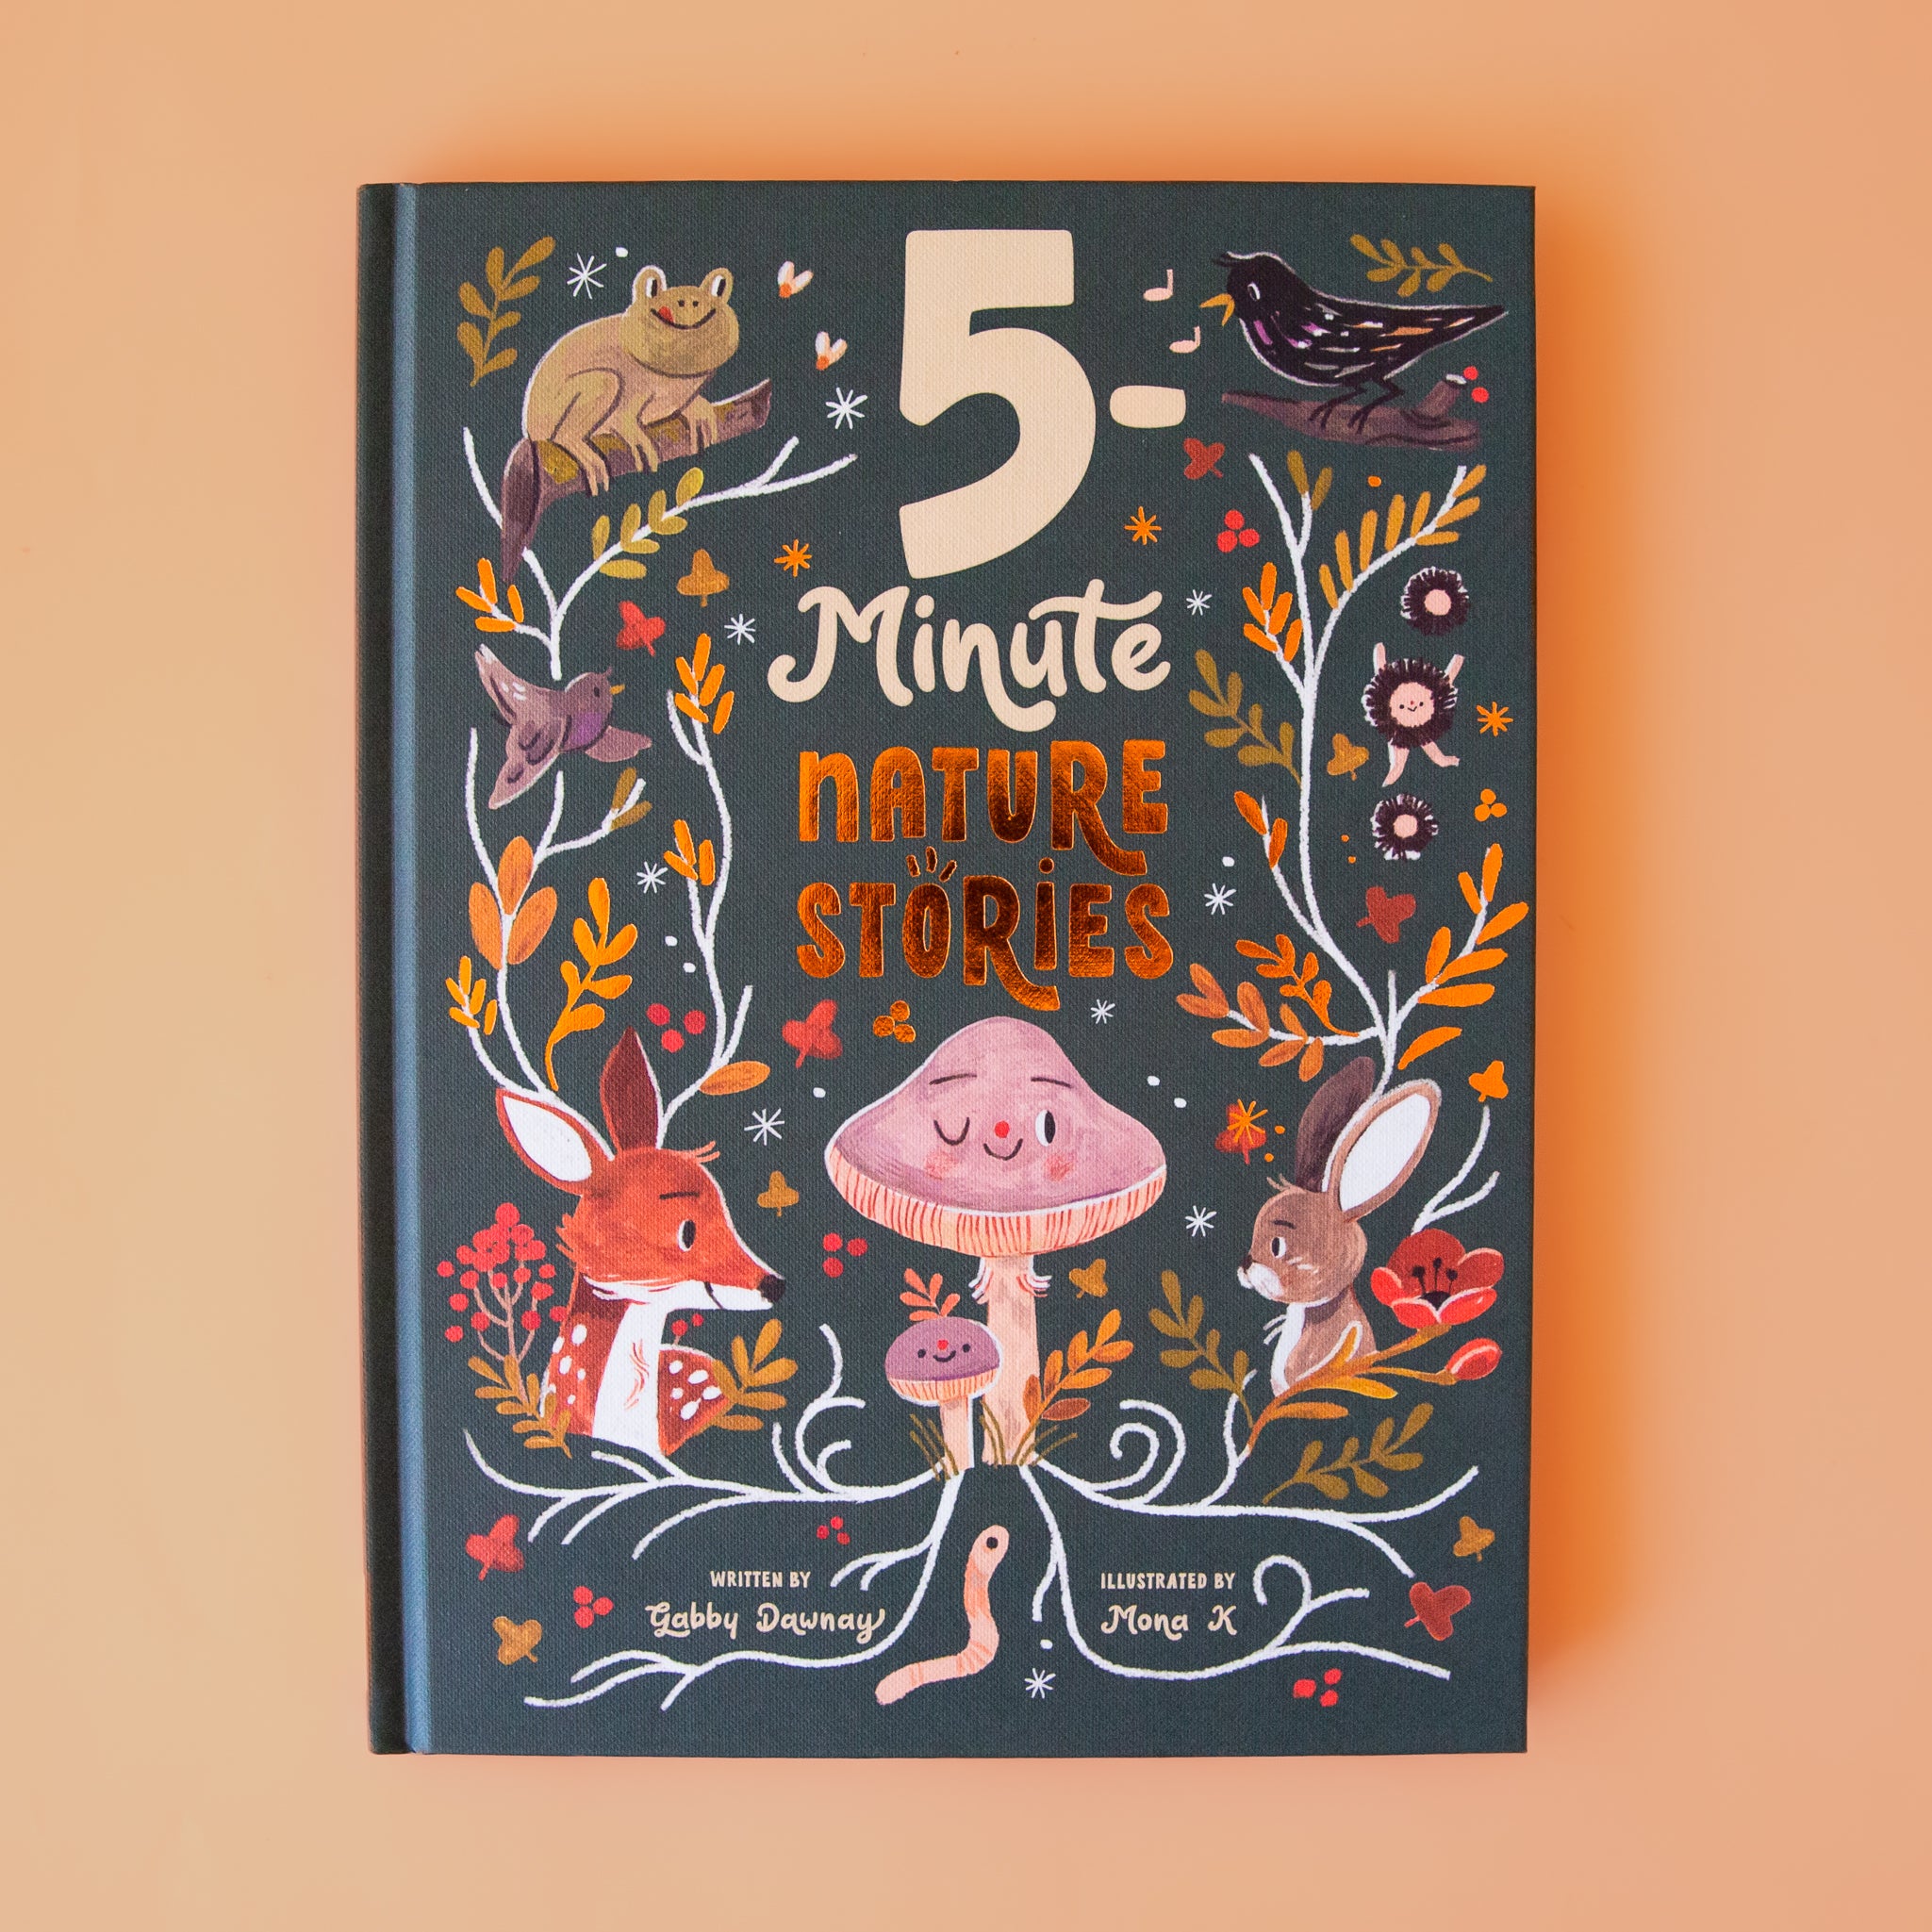 A book cover with illustrations of woodland creatures and plants along with the title that reads, "5 minute Nature Stories".